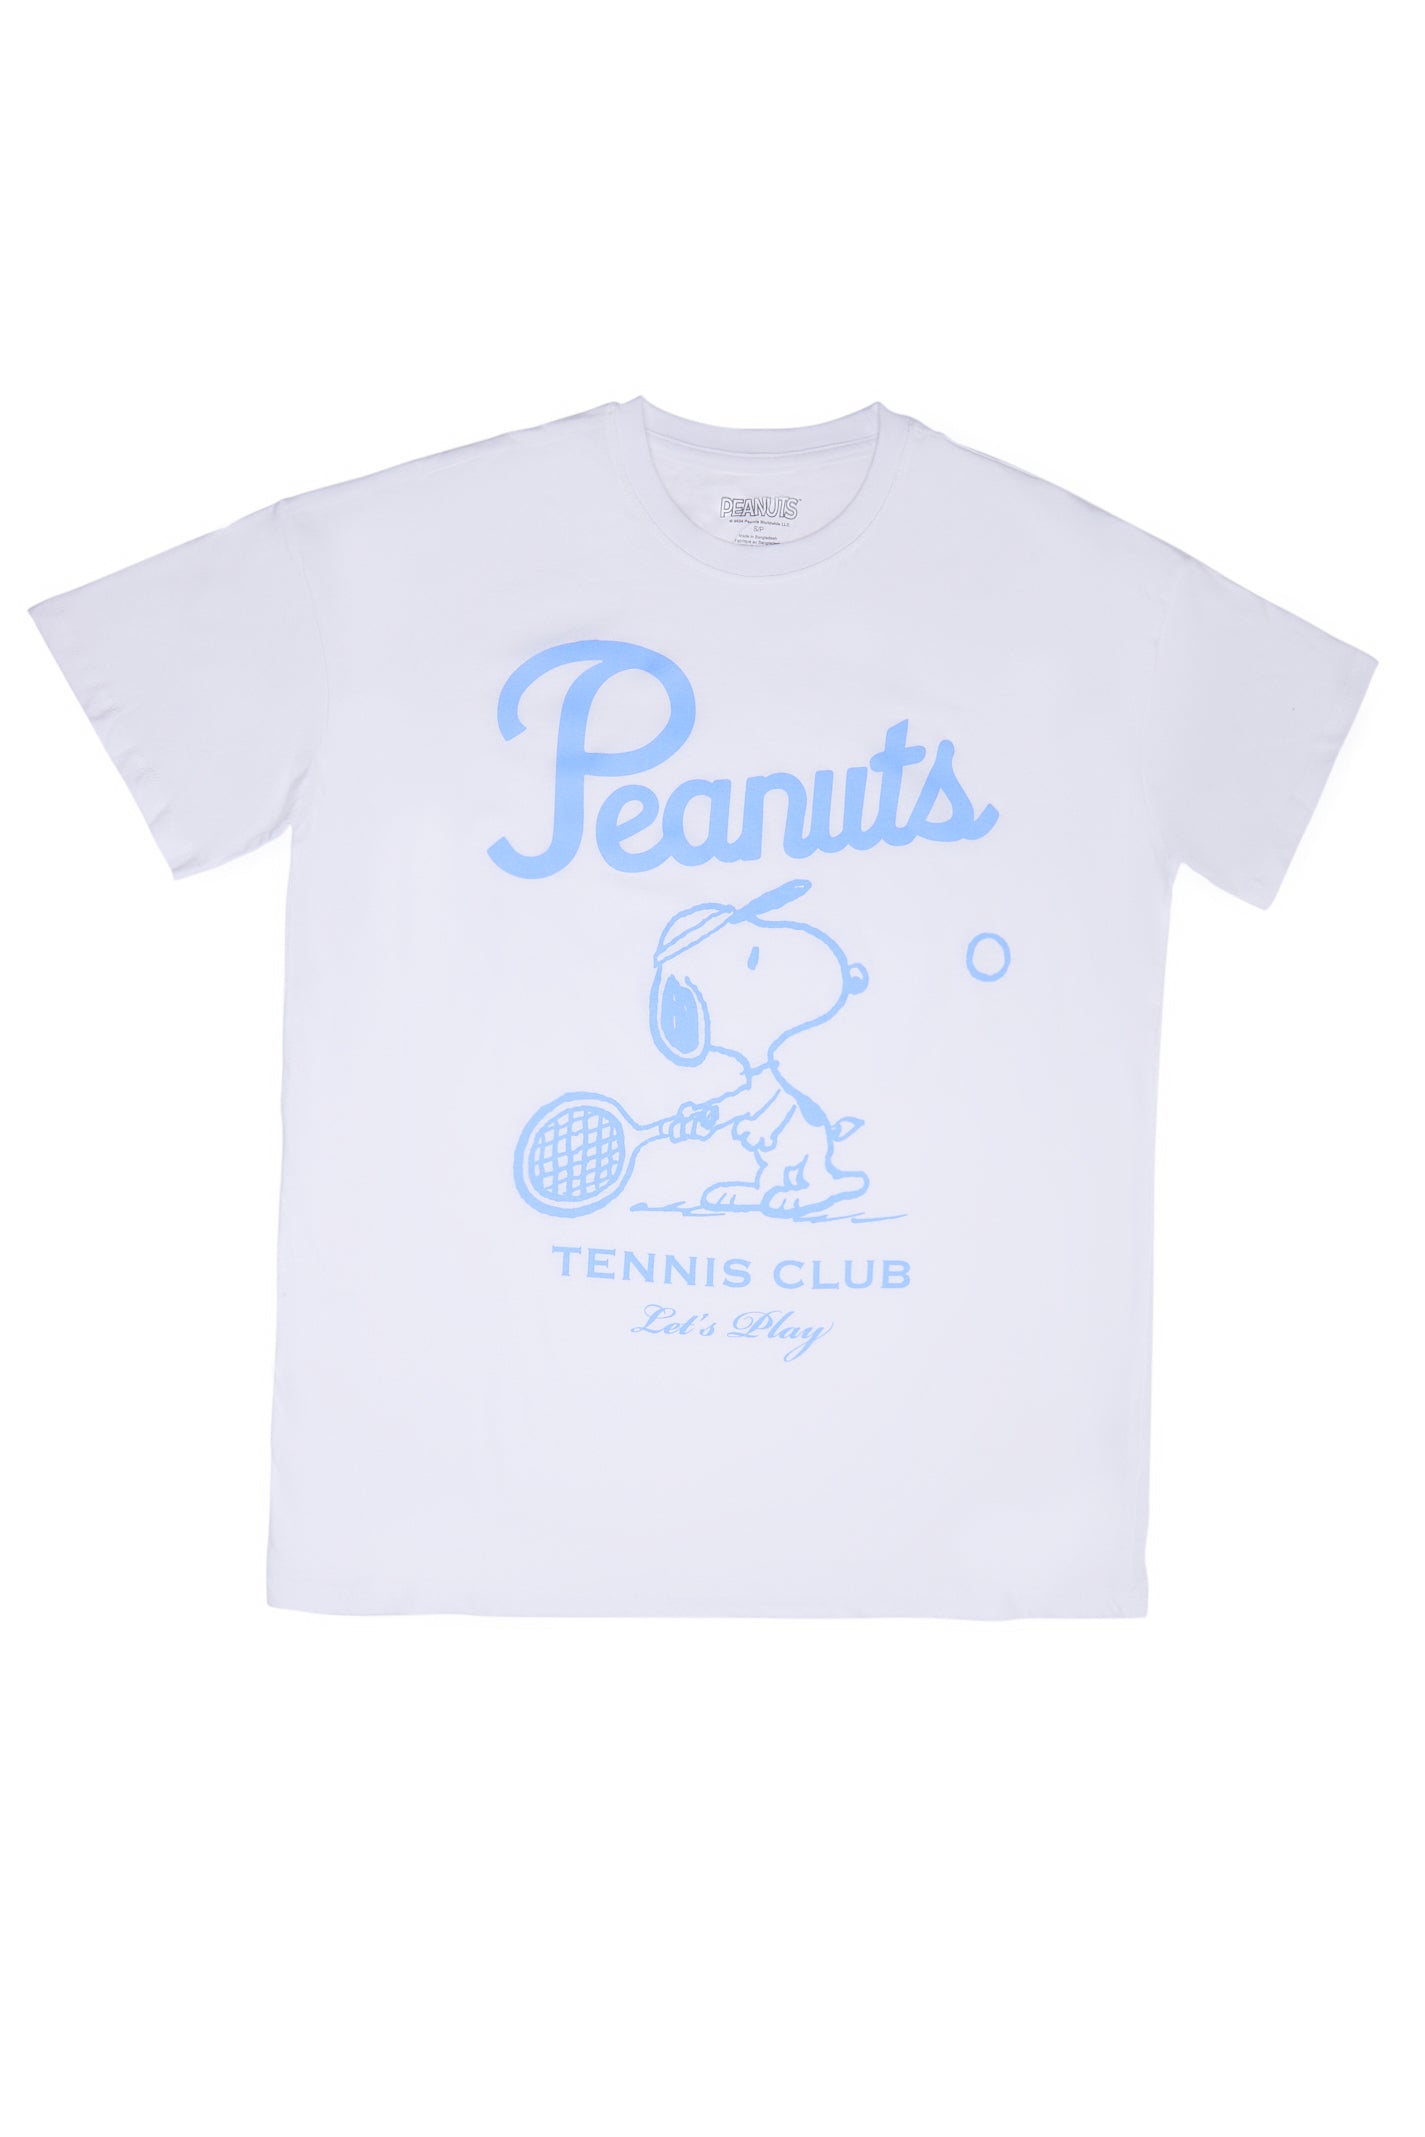 Peanuts Snoopy Tennis Club Graphic Relaxed Tee